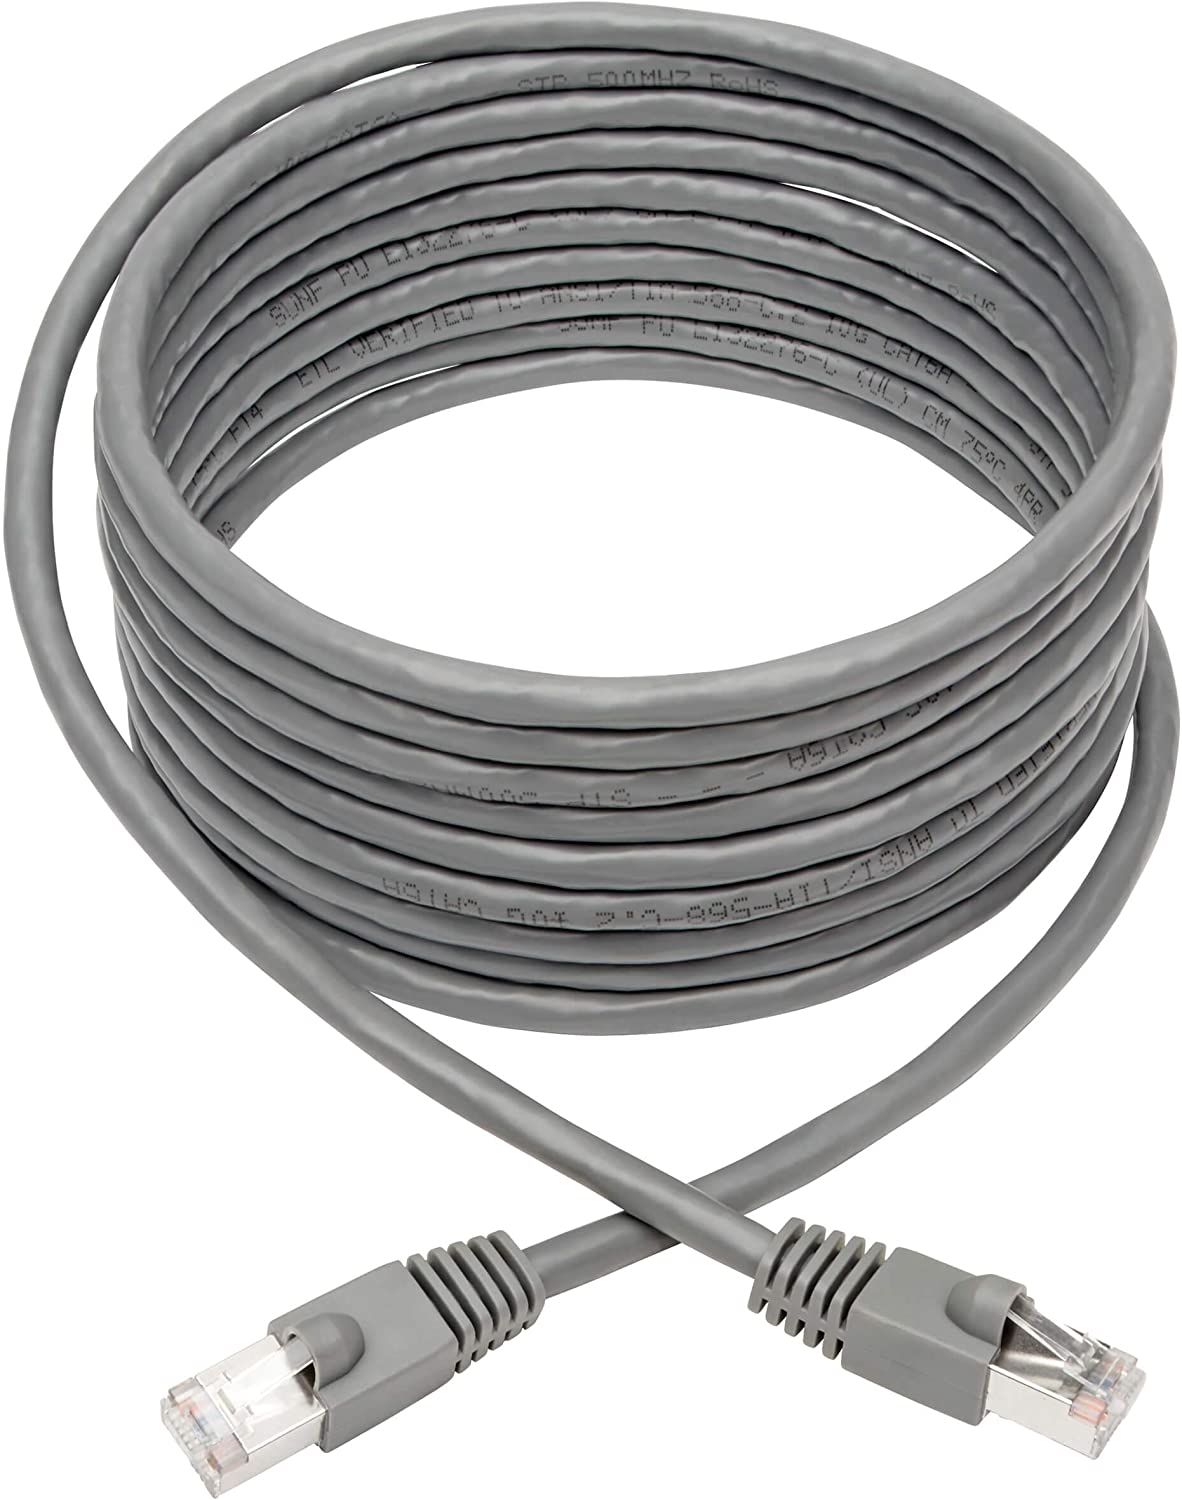 Tripp Lite Cat6a Ethernet Cable, 10G-Certified Patch Cable, Snagless, Shielded STP PoE Ethernet Cord, 15 ft, Gray (N262-025-GY) 25ft. Gray